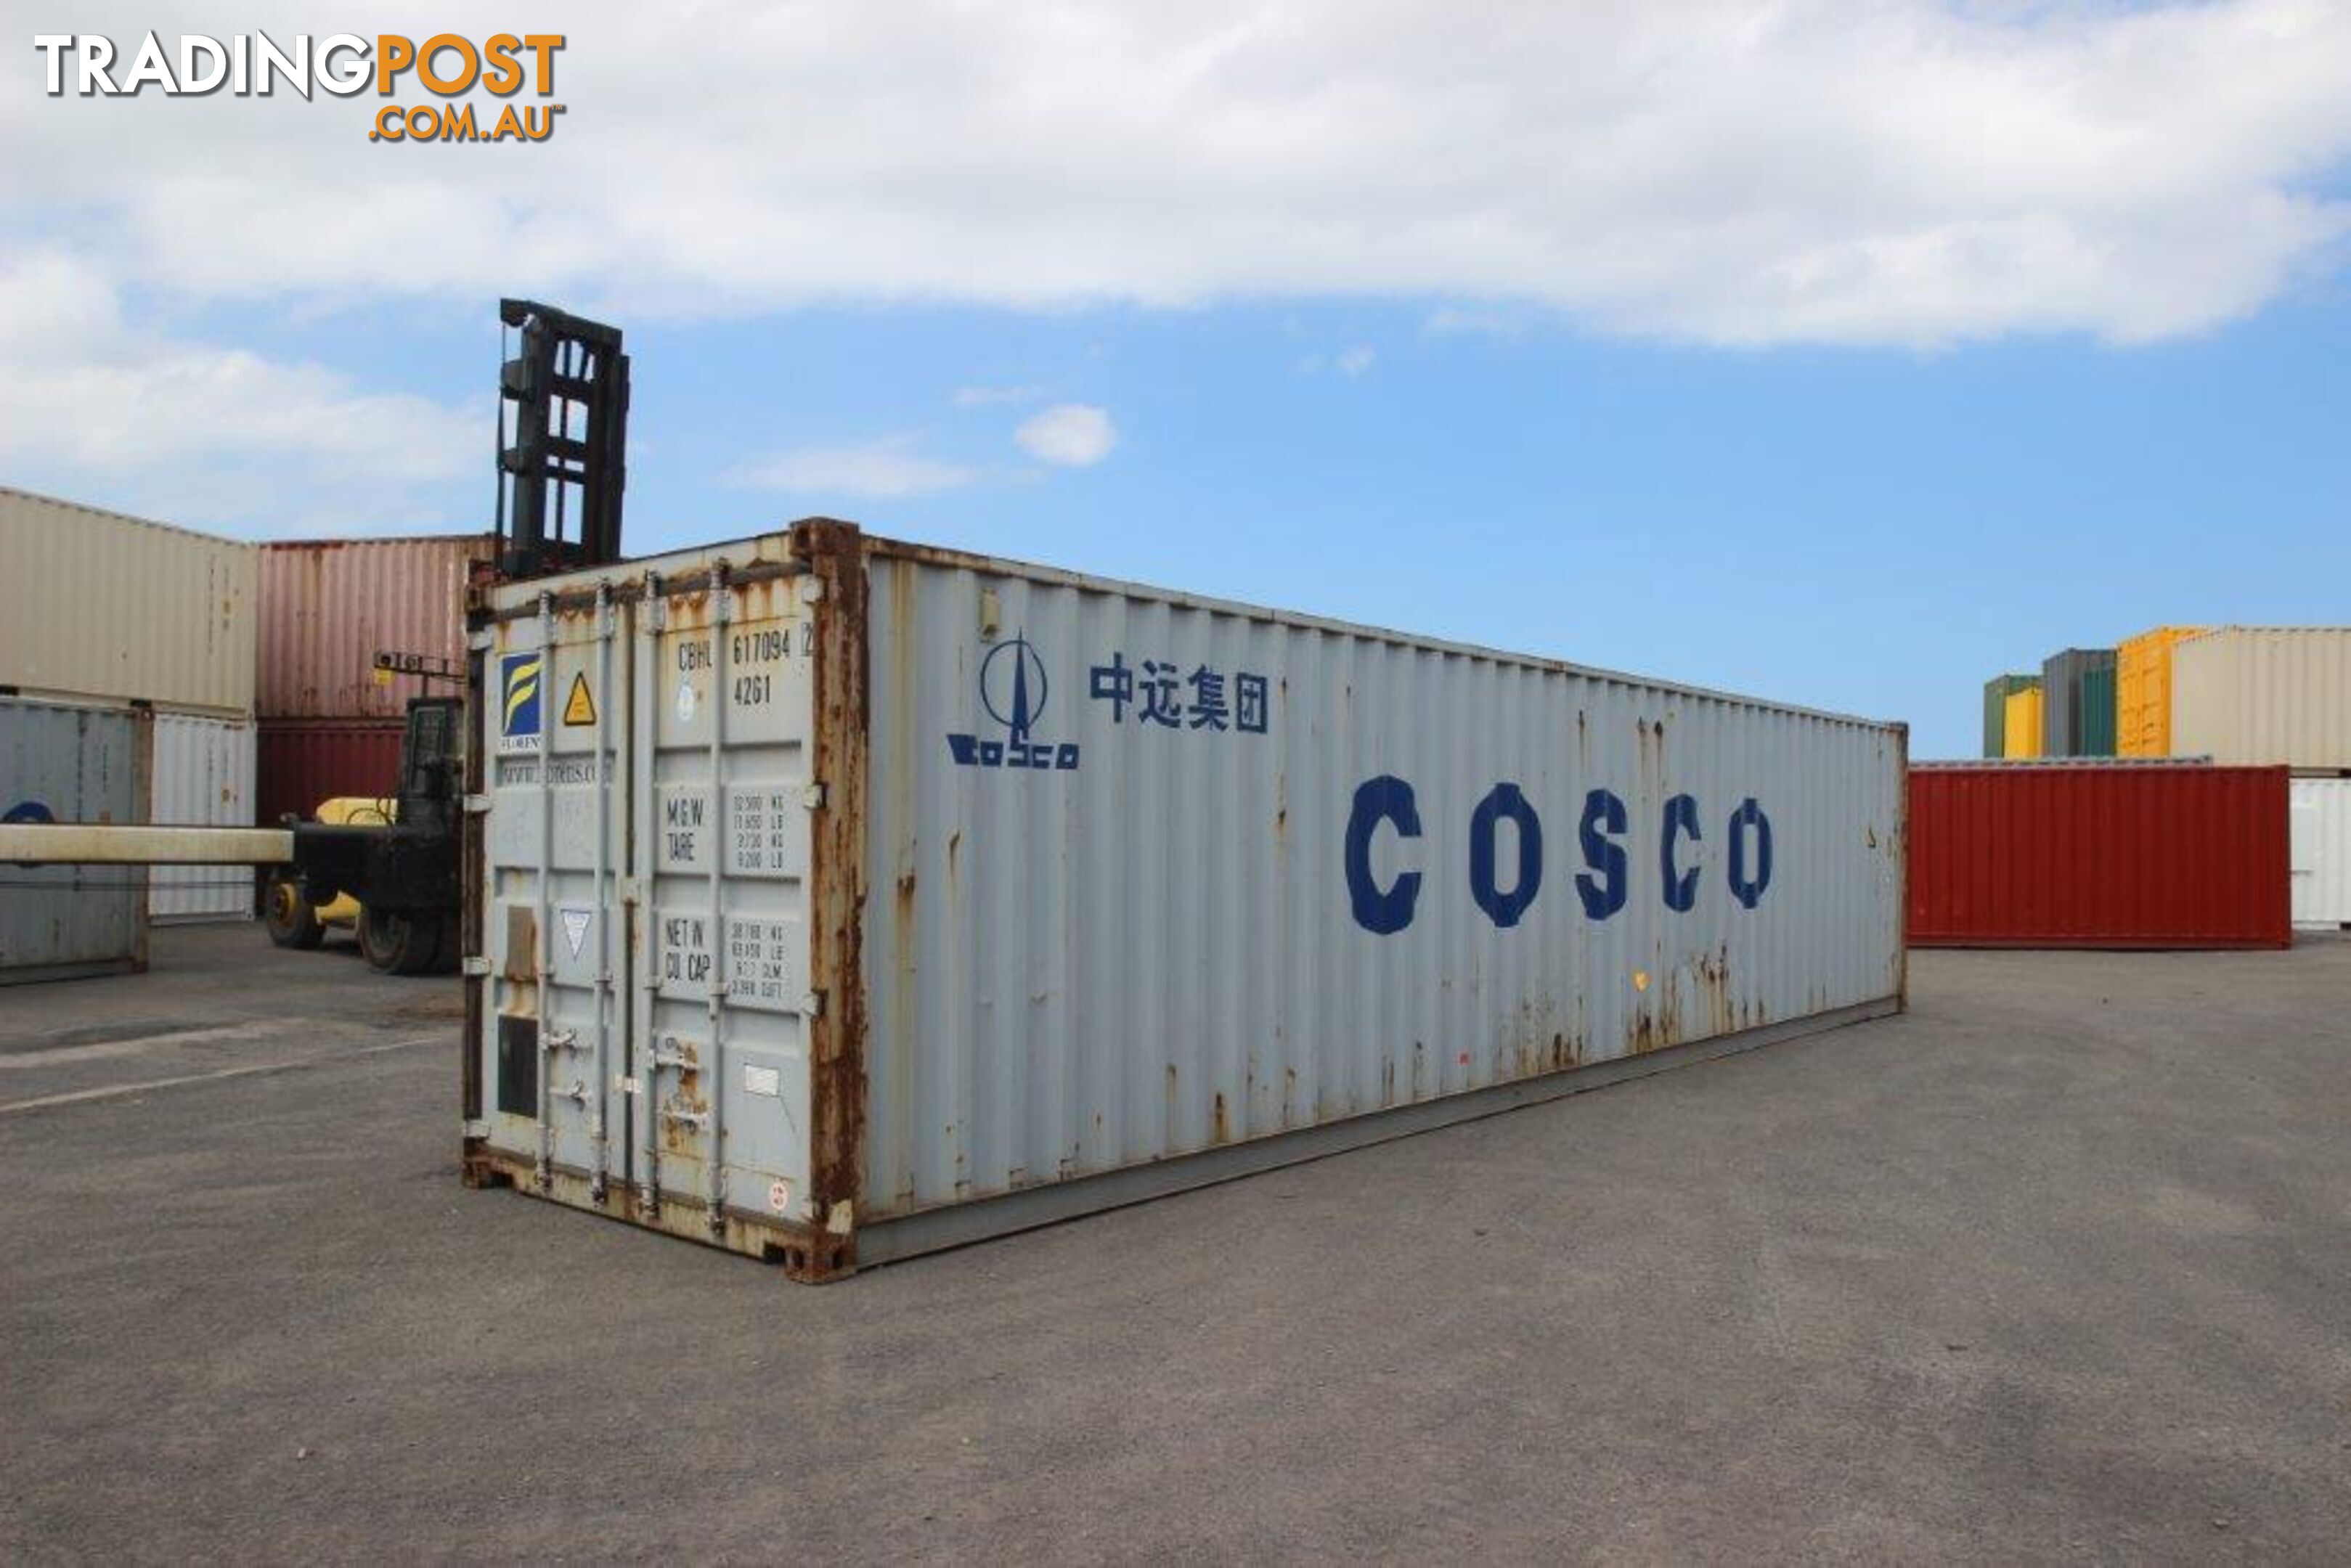 Used 40ft Shipping Containers Williamtown - From $3990 + GST